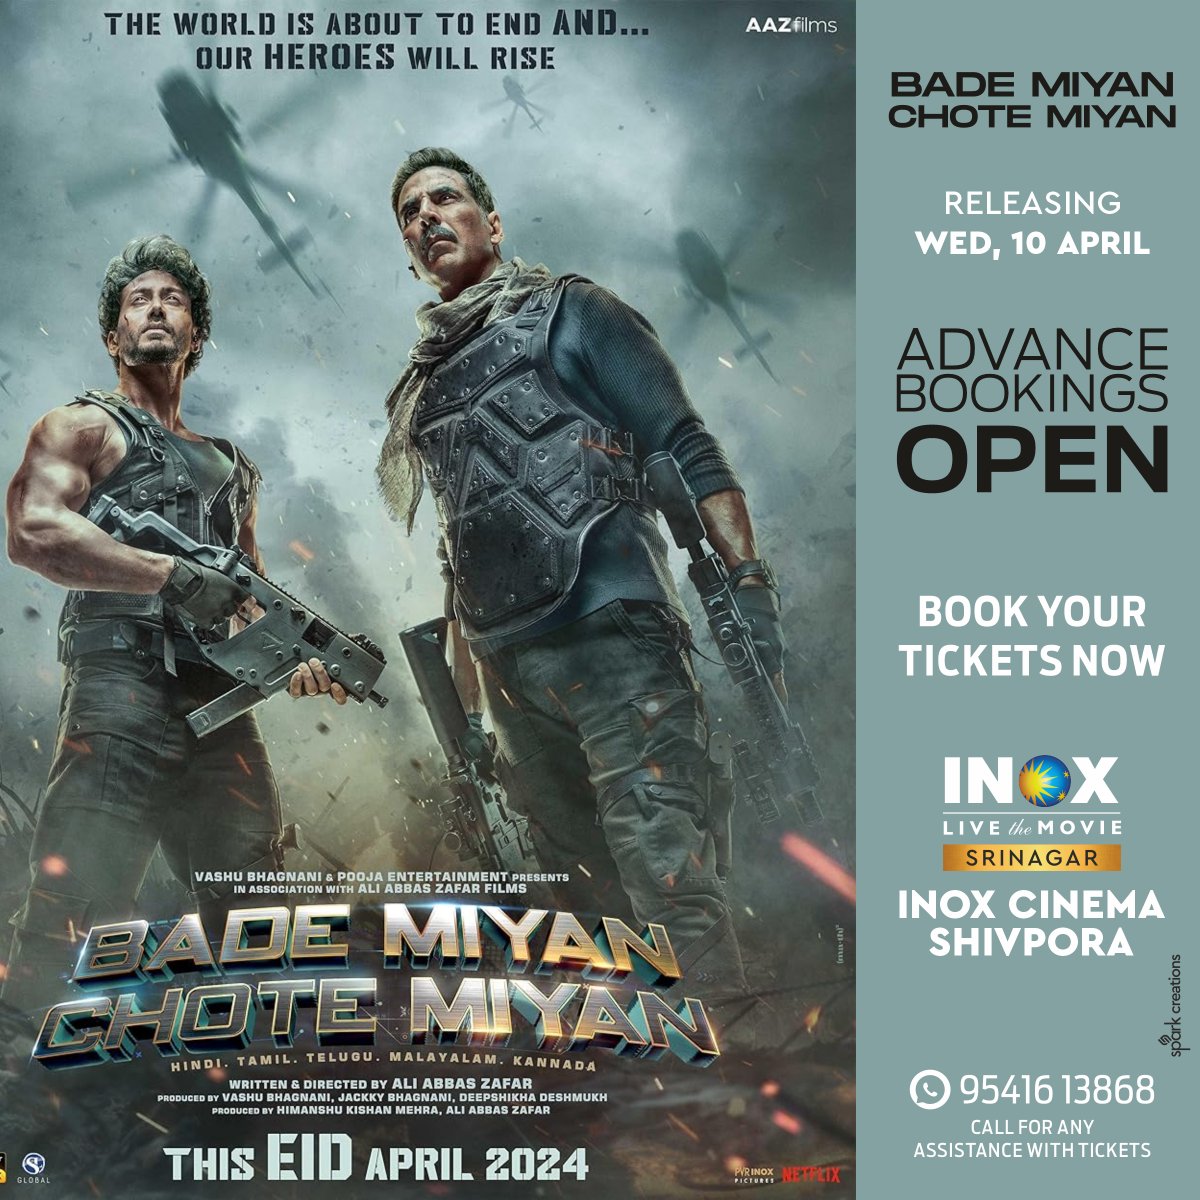 You are this close to experiencing REAL ACTION in theaters! 🤜🤛
#BadeMiyanChoteMiyan advance booking are open.

Experience it in CINEMAS ON 10th APRIL!

#BadeMiyanChoteMiyanOnApril10 #BadeMiyanChoteMiyanOnEid2024 #inoxsrinagar #srinagar #kashmir #inox #movies #cinema #bollywood…